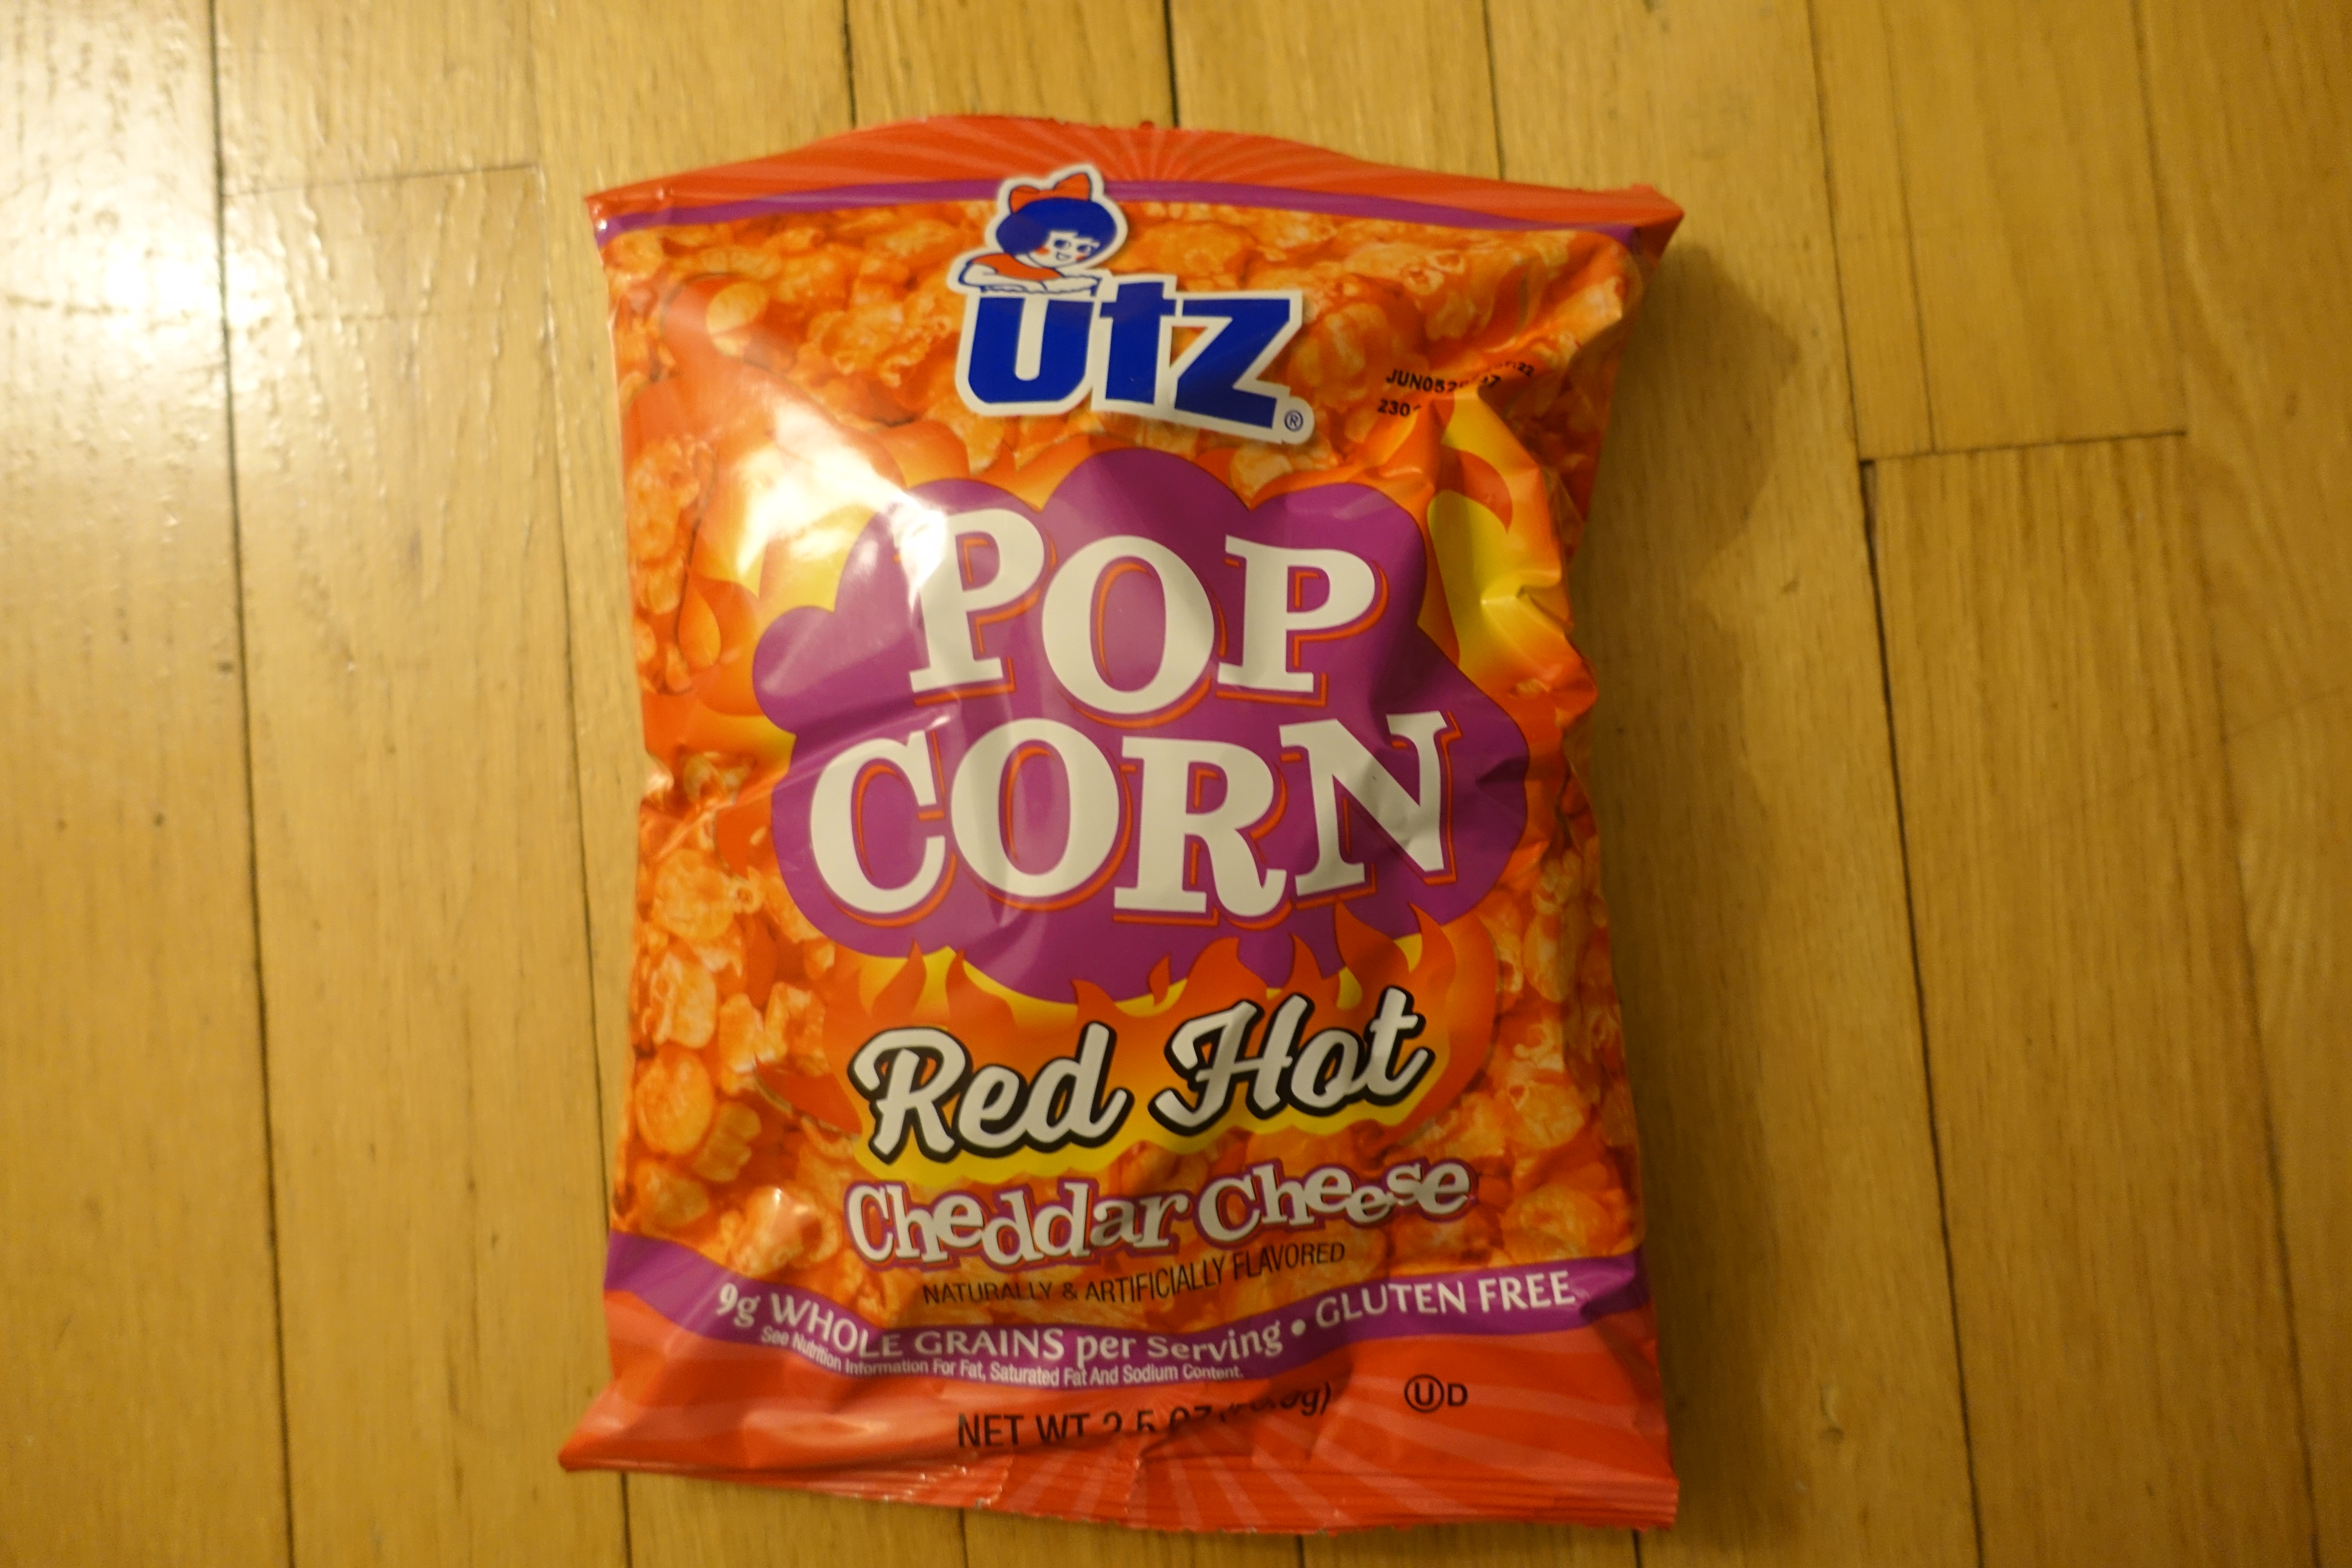 Utz's Red Hot Cheddar